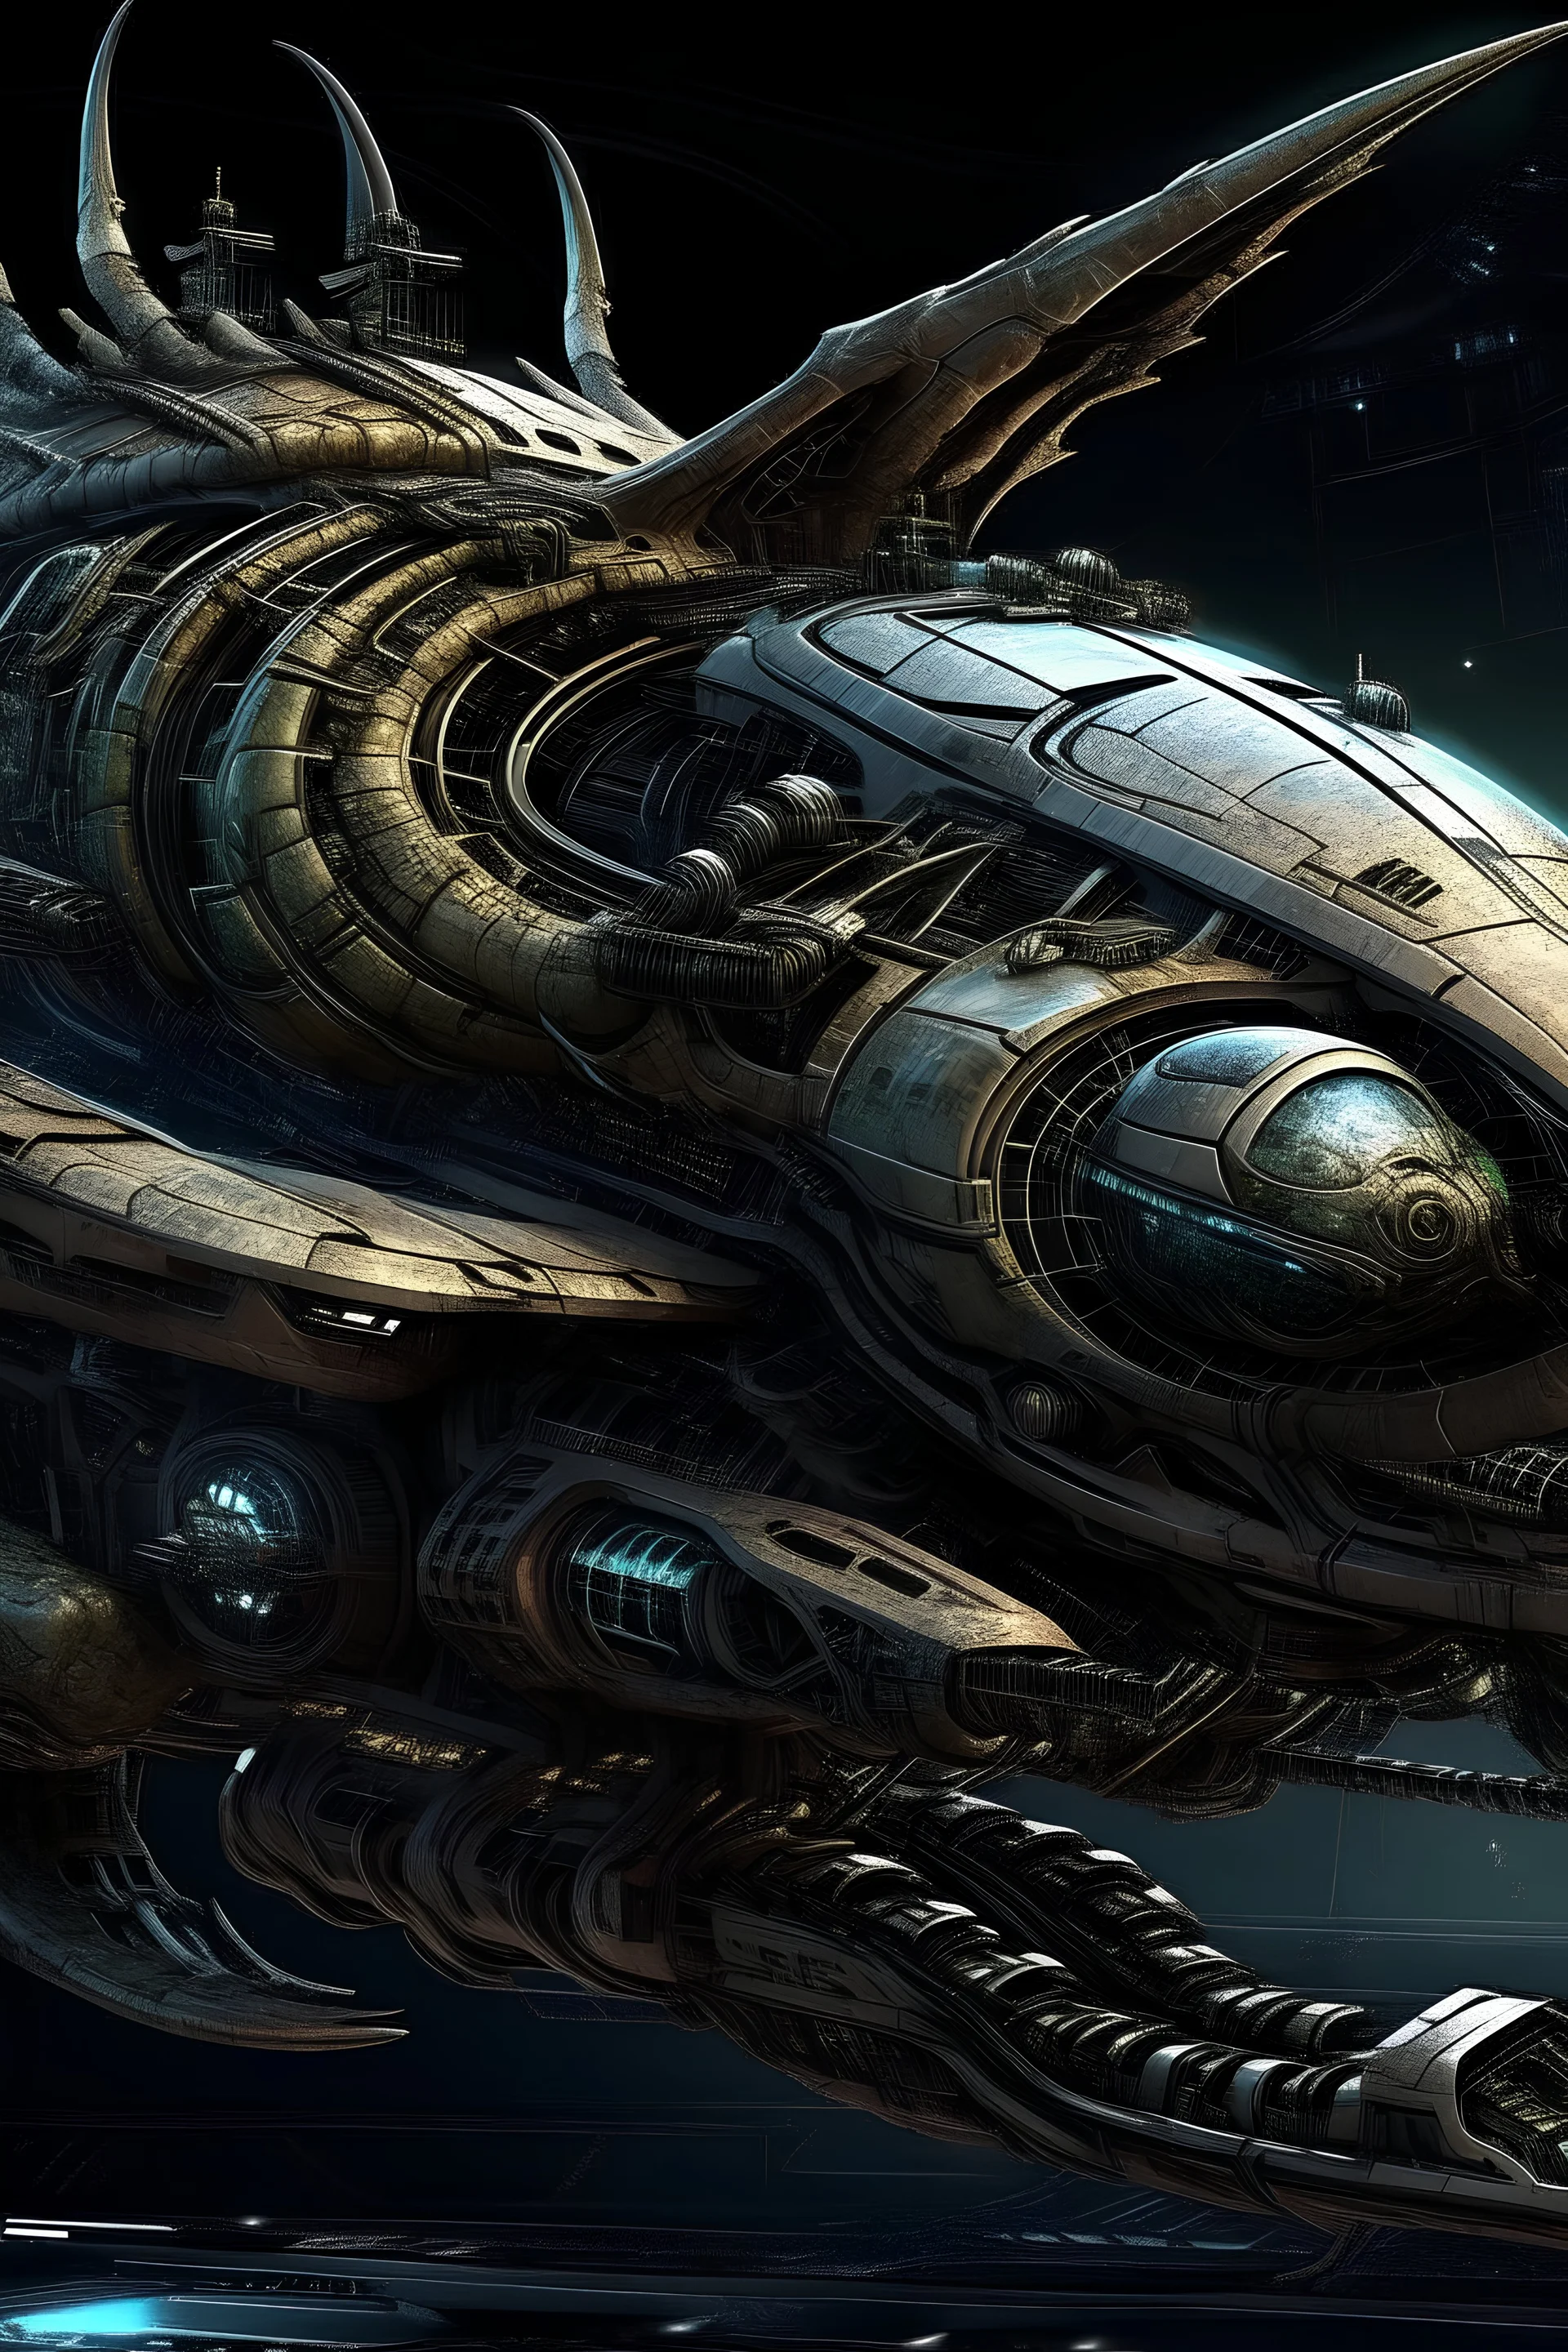 magitek spaceship, dragon, biomechanical, creature, space, zoom out, whole frame